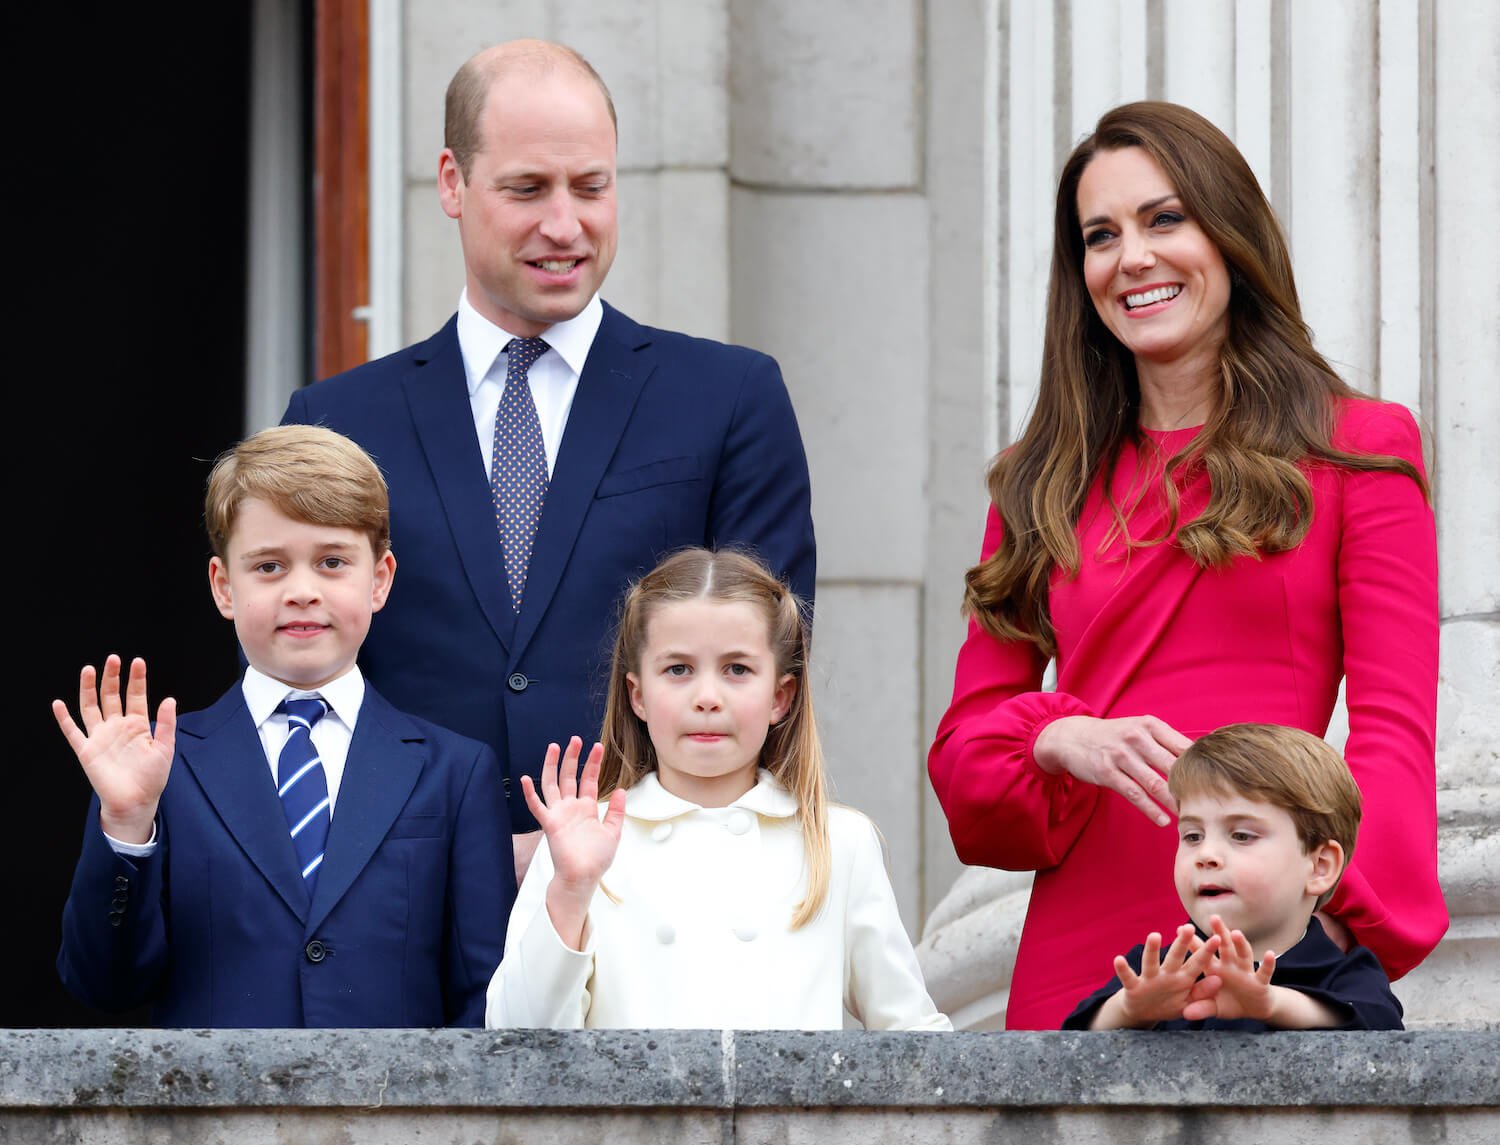 Prince William and Kate Middleton smile with their children Prince George, Princess Charlotte, and Prince Louis